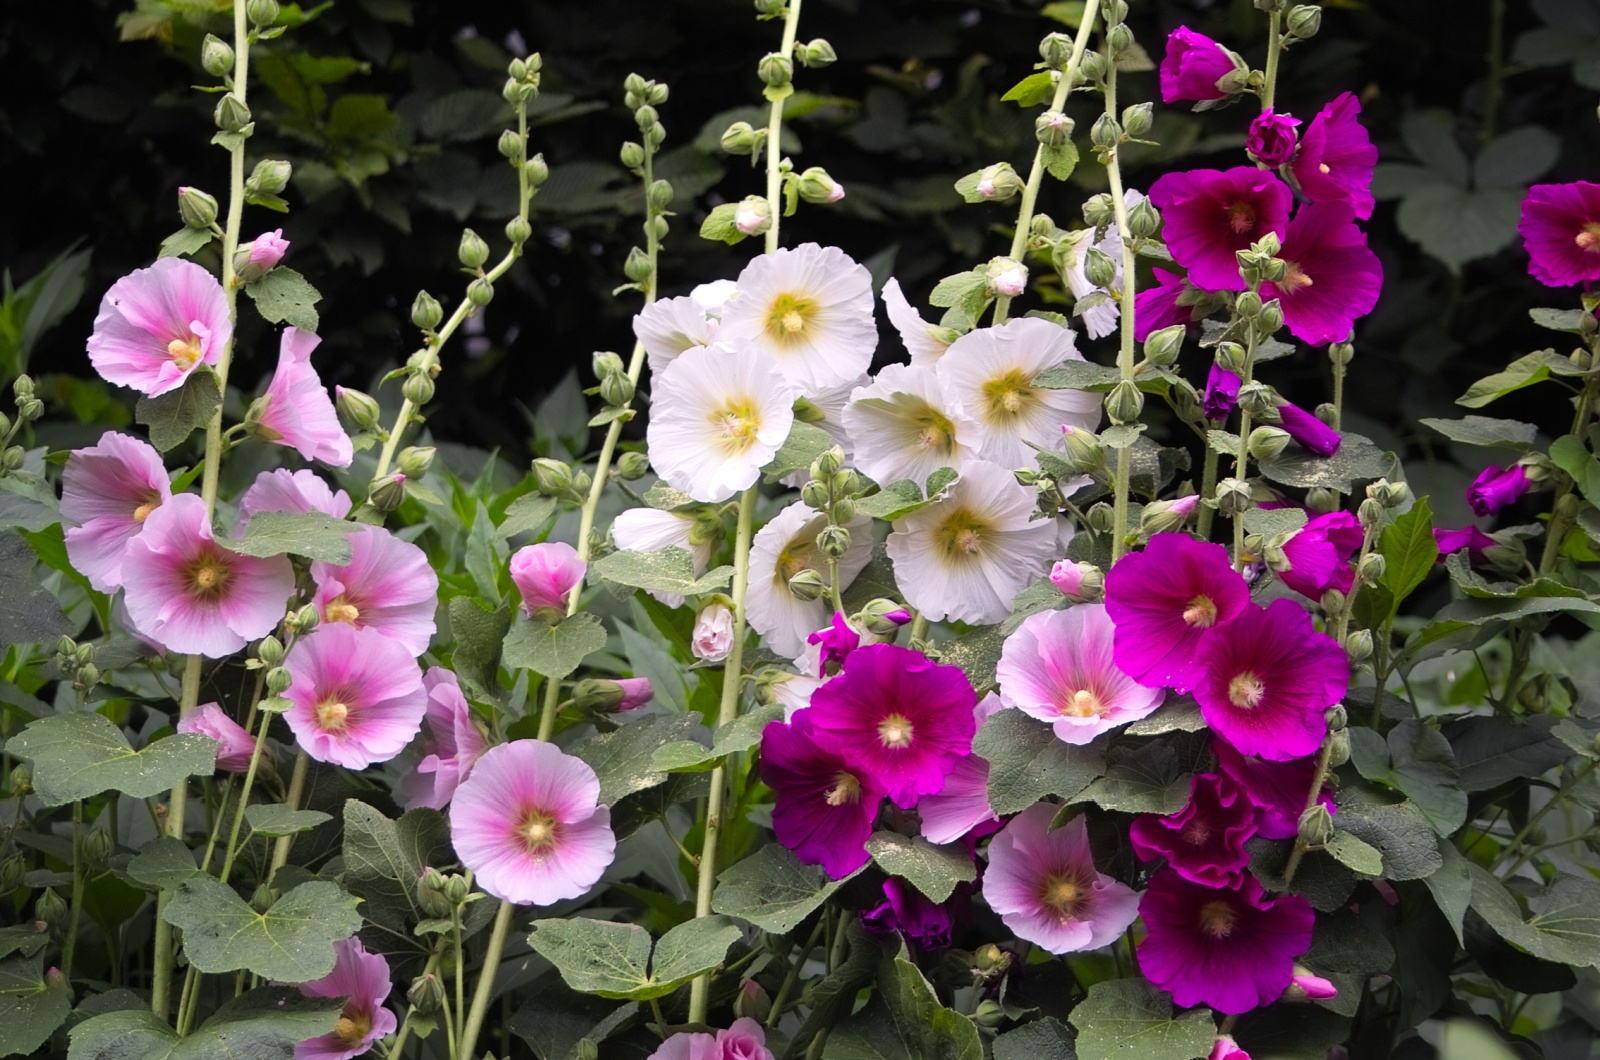 Hollyhocks in mixed colors